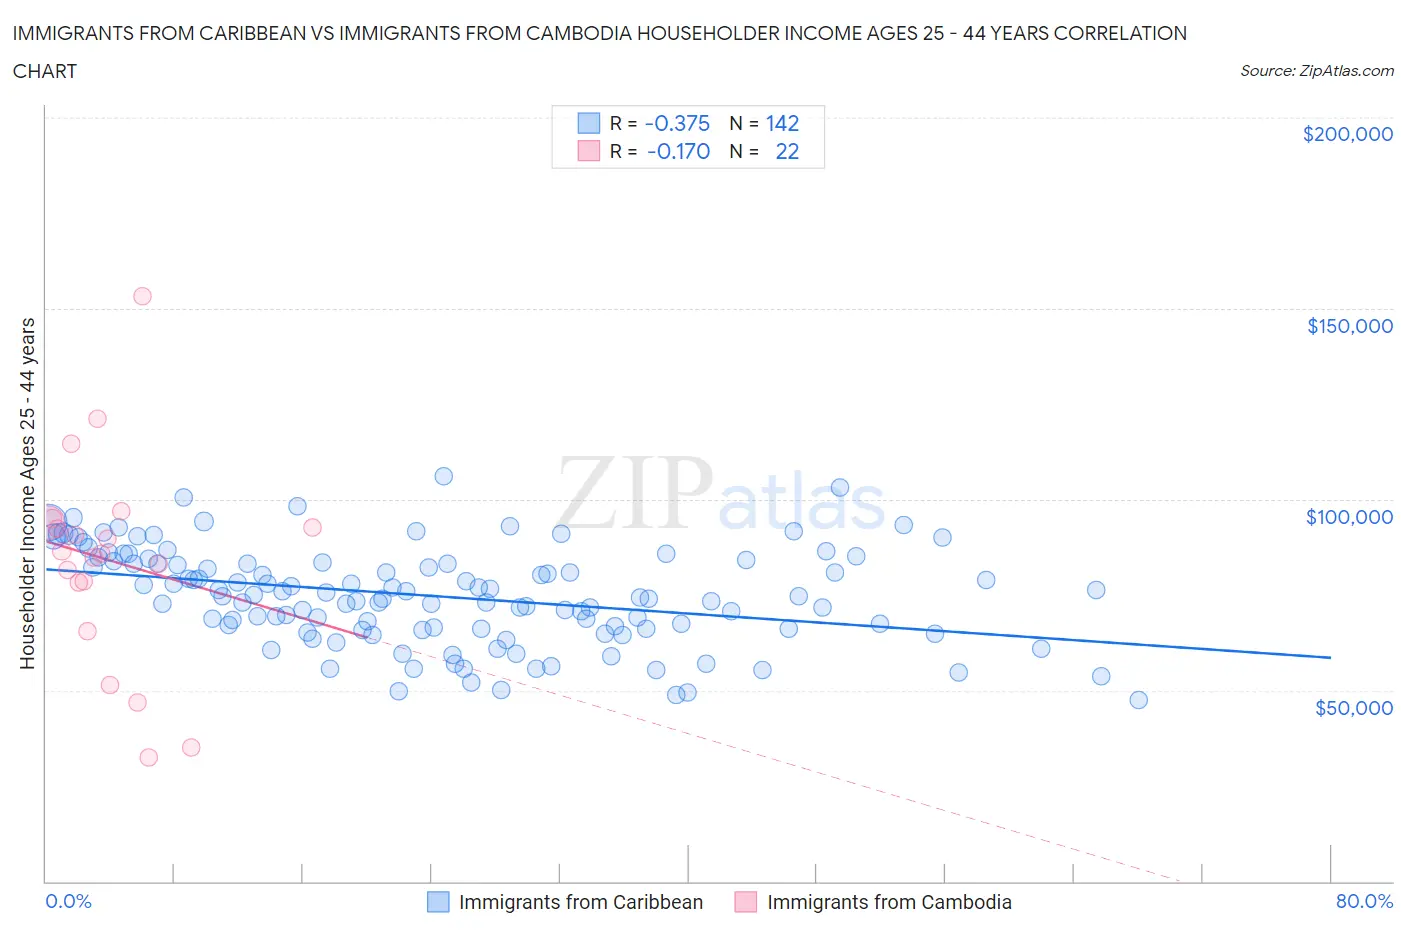 Immigrants from Caribbean vs Immigrants from Cambodia Householder Income Ages 25 - 44 years